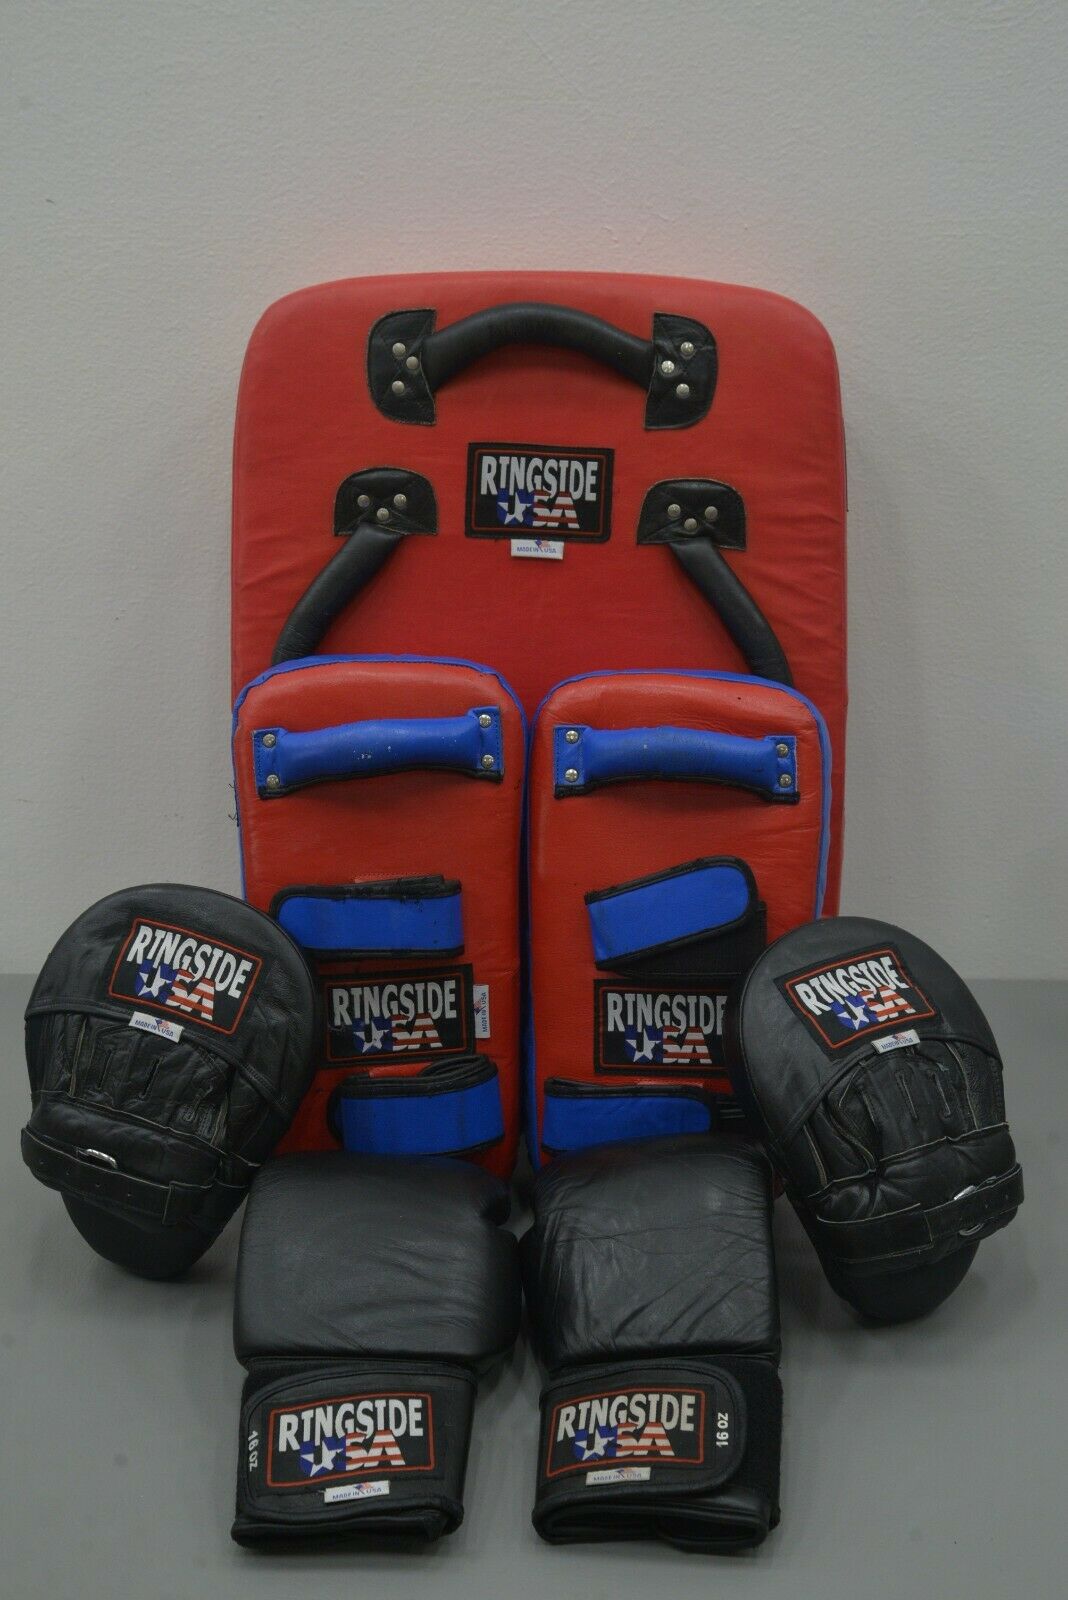 Ringside Boxing Training Gear Martial Arts MMA Fight Gear 24152 WH2 